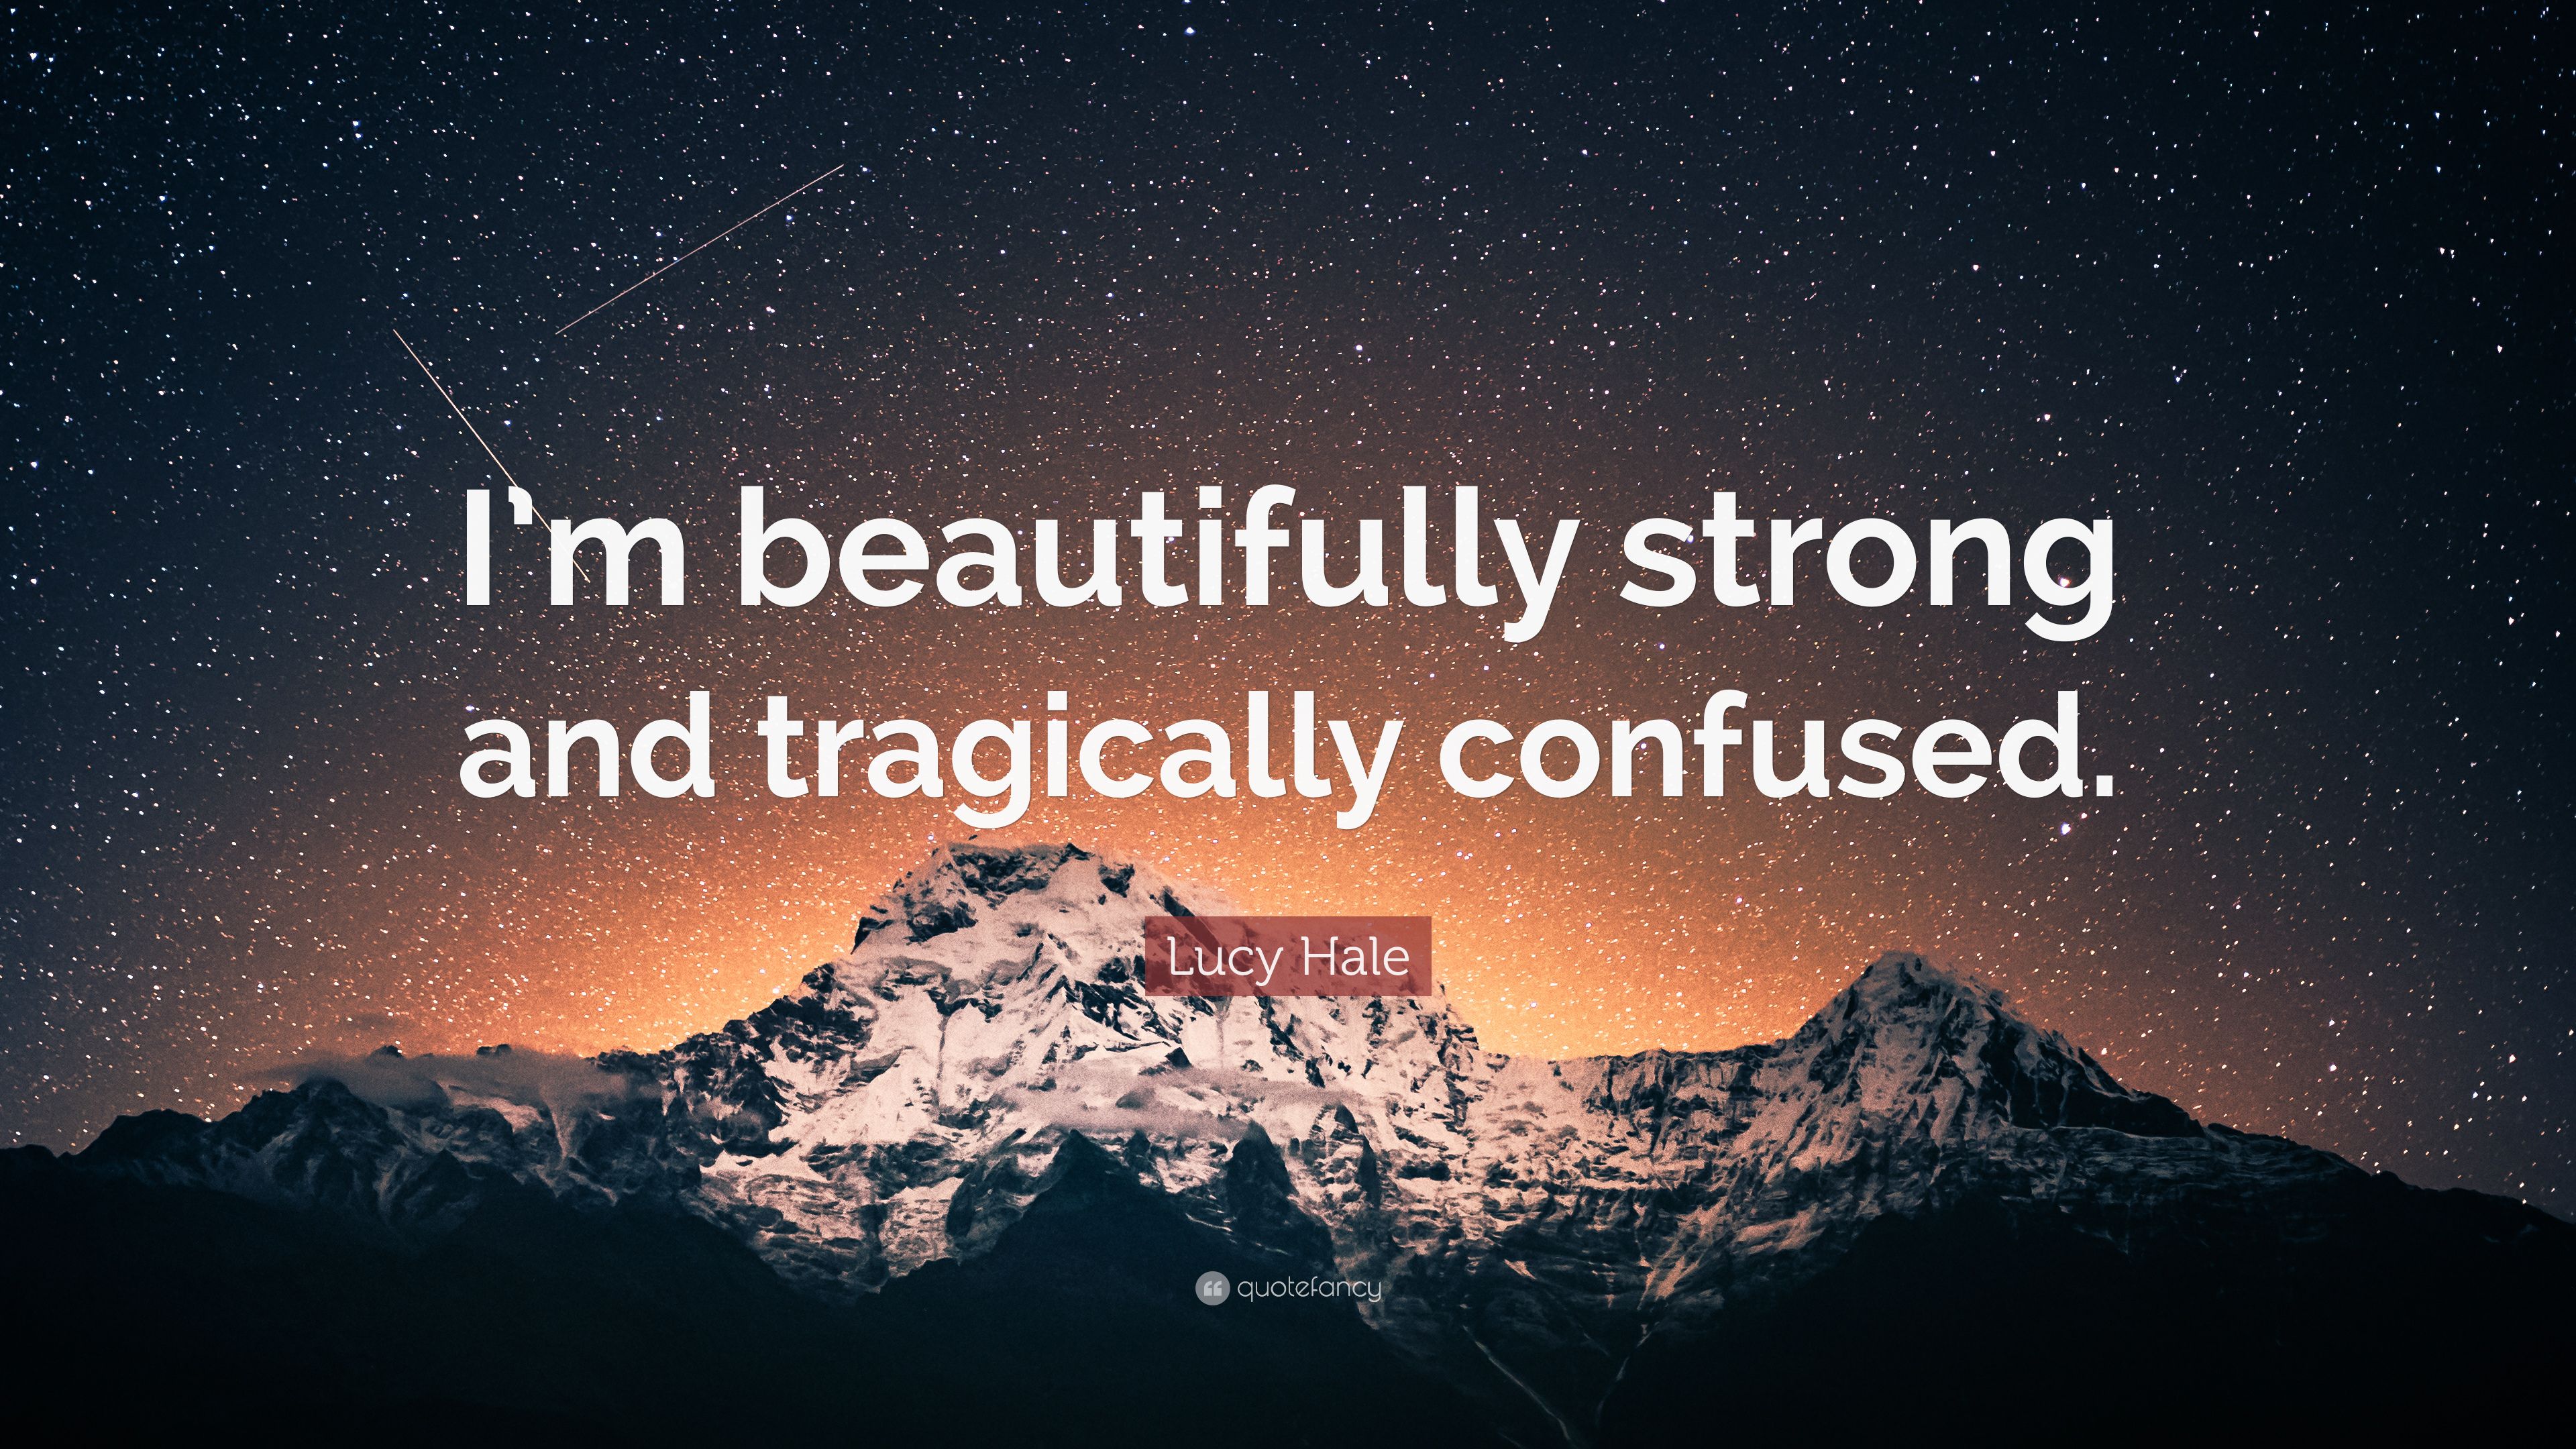 Lucy Hale Quote: “I'm beautifully strong and tragically confused